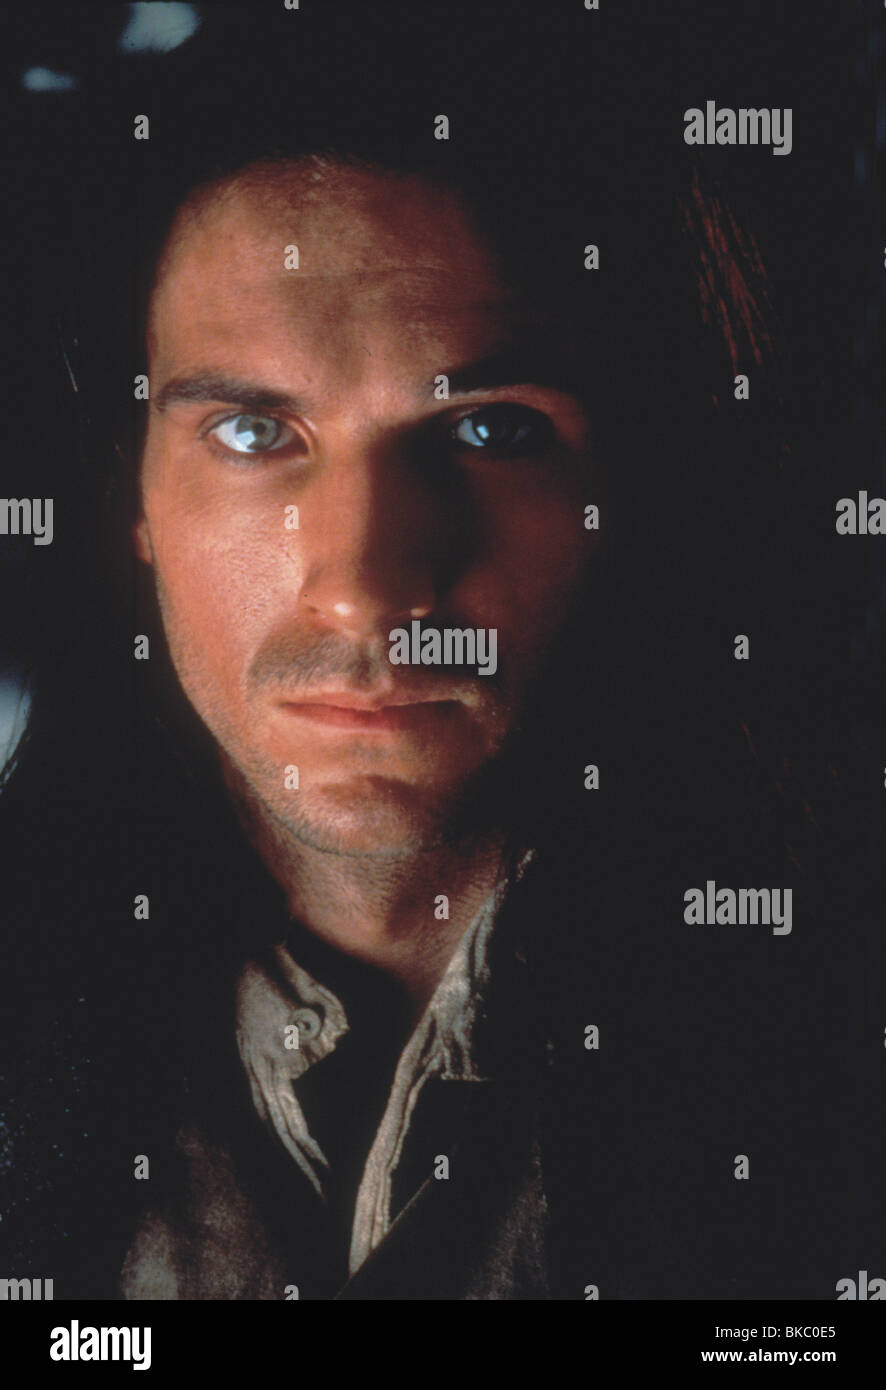 ALTEZZE DI WUTHERING (1992) RALPH FIENNES WTH3 003 Foto Stock